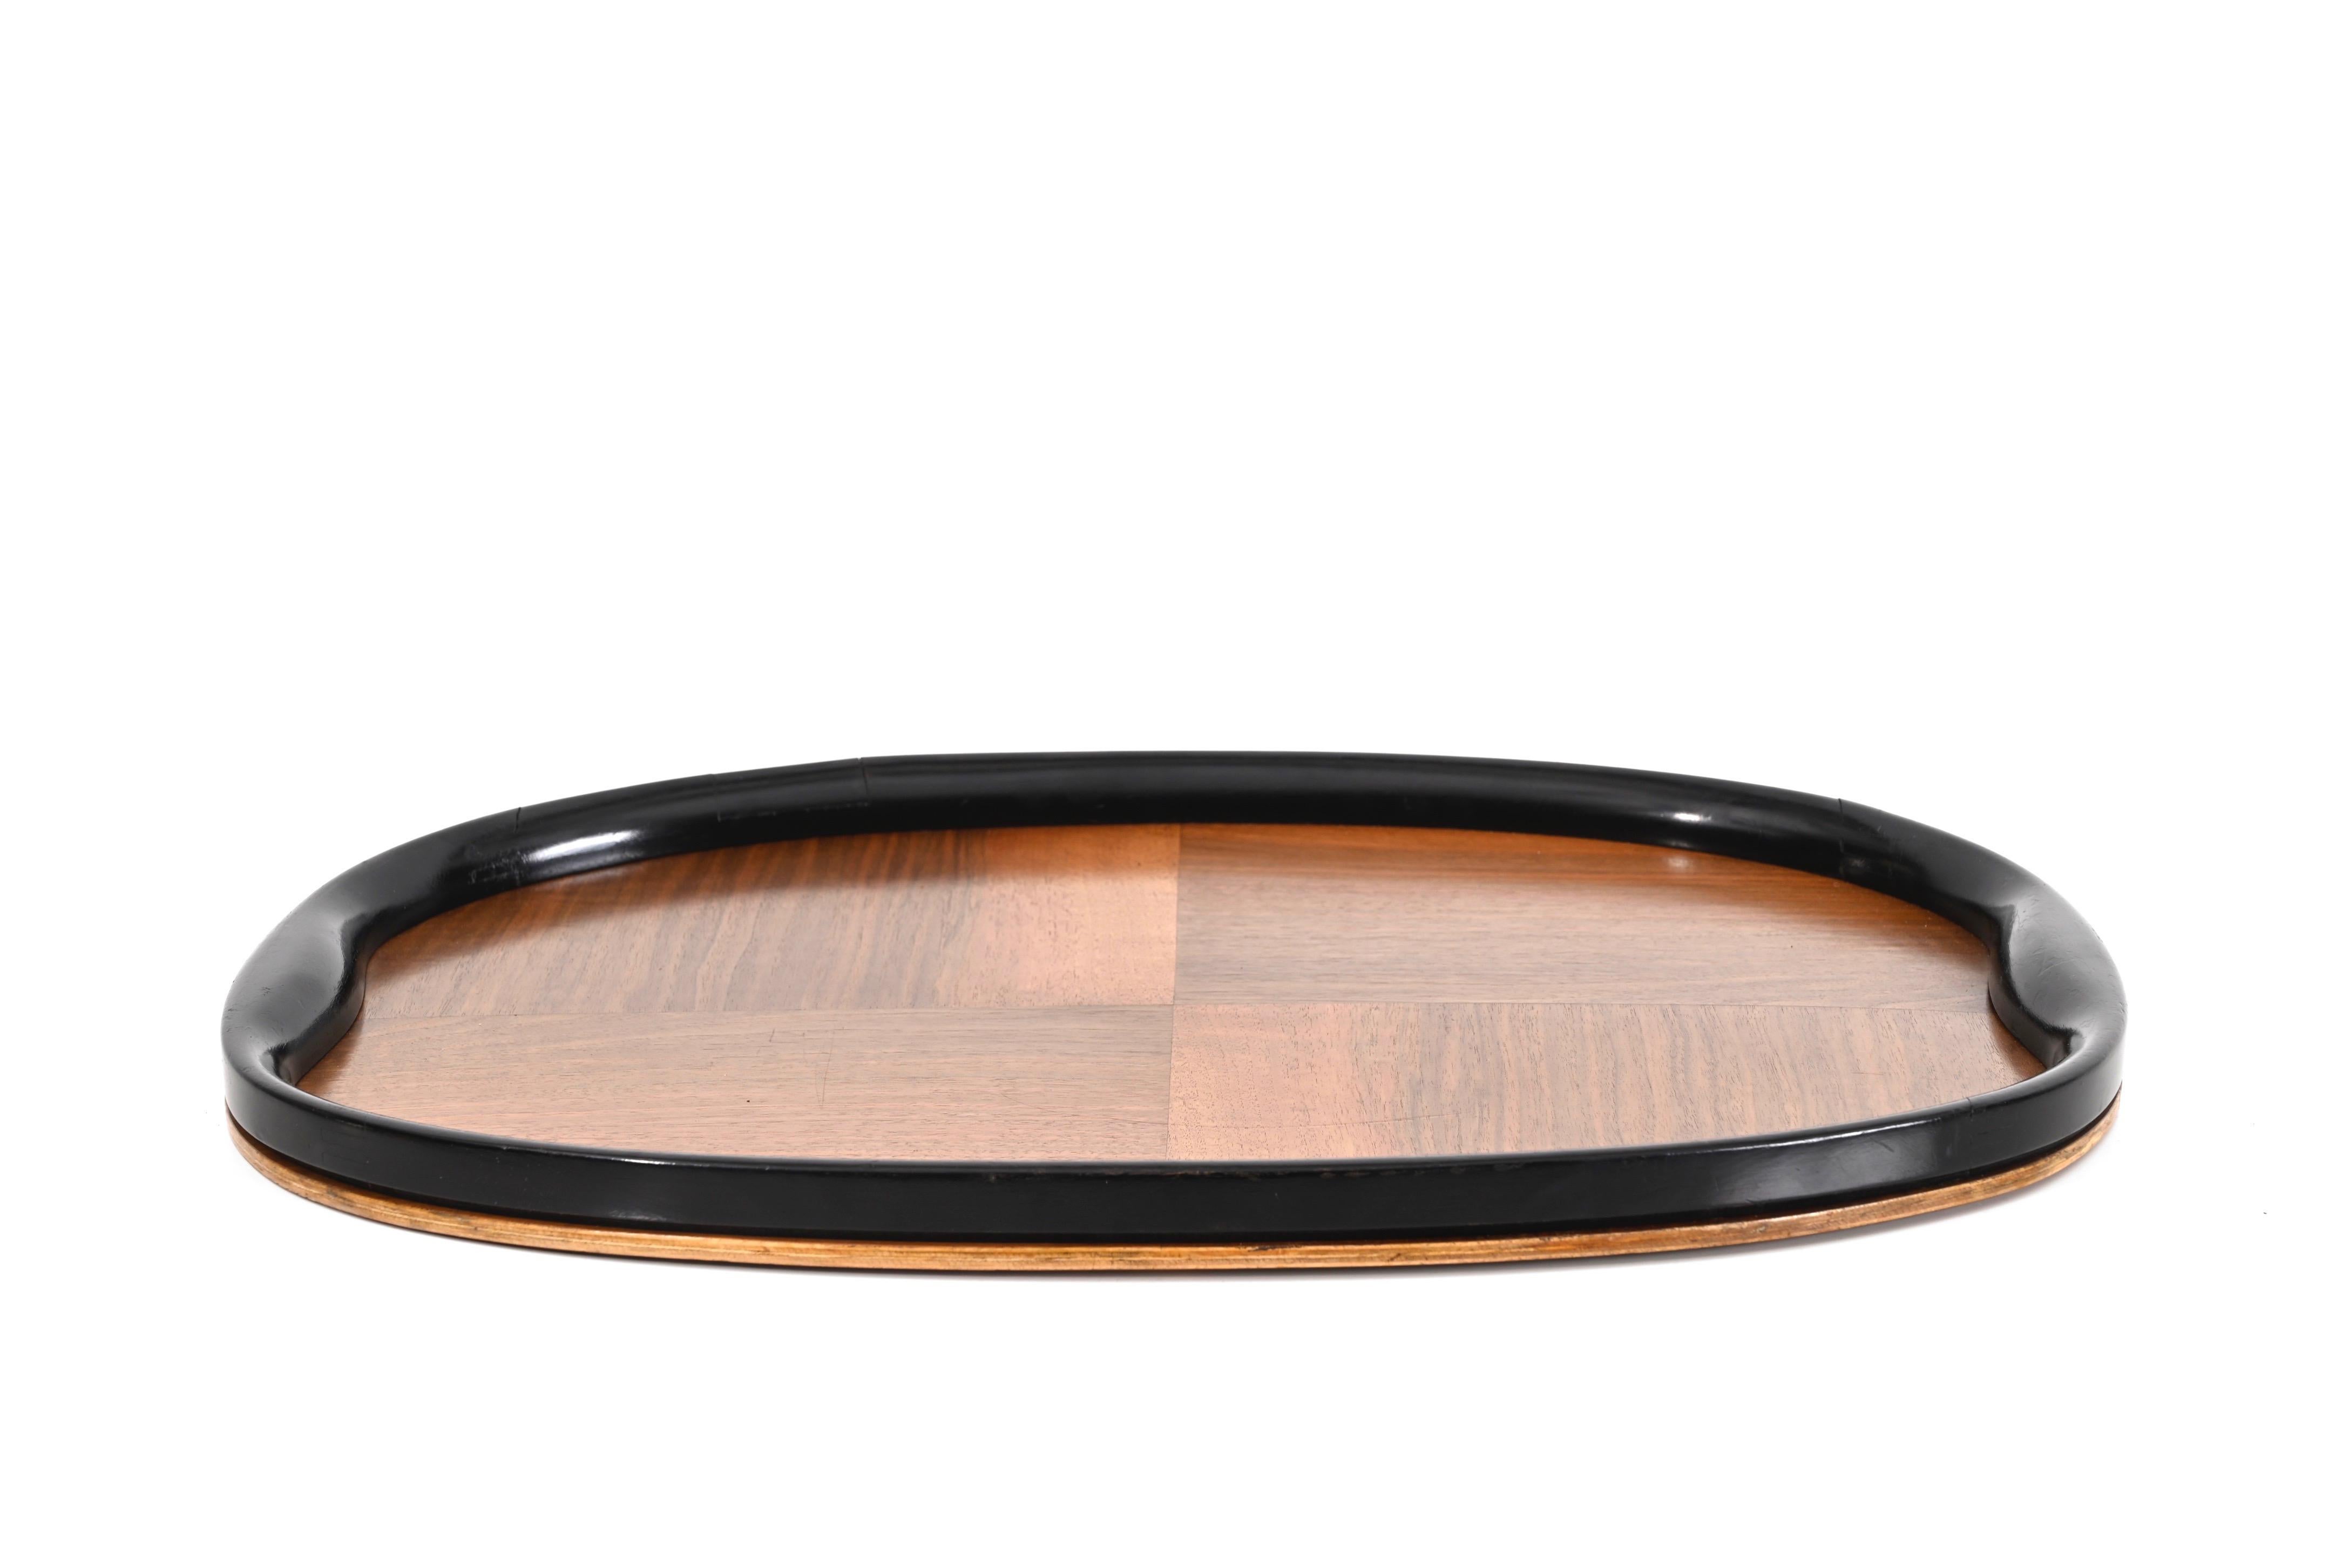 Mid-20th Century Pair of Art Deco Serving Trays, Ebonized Wood and Walnut, Italy, 1940s For Sale